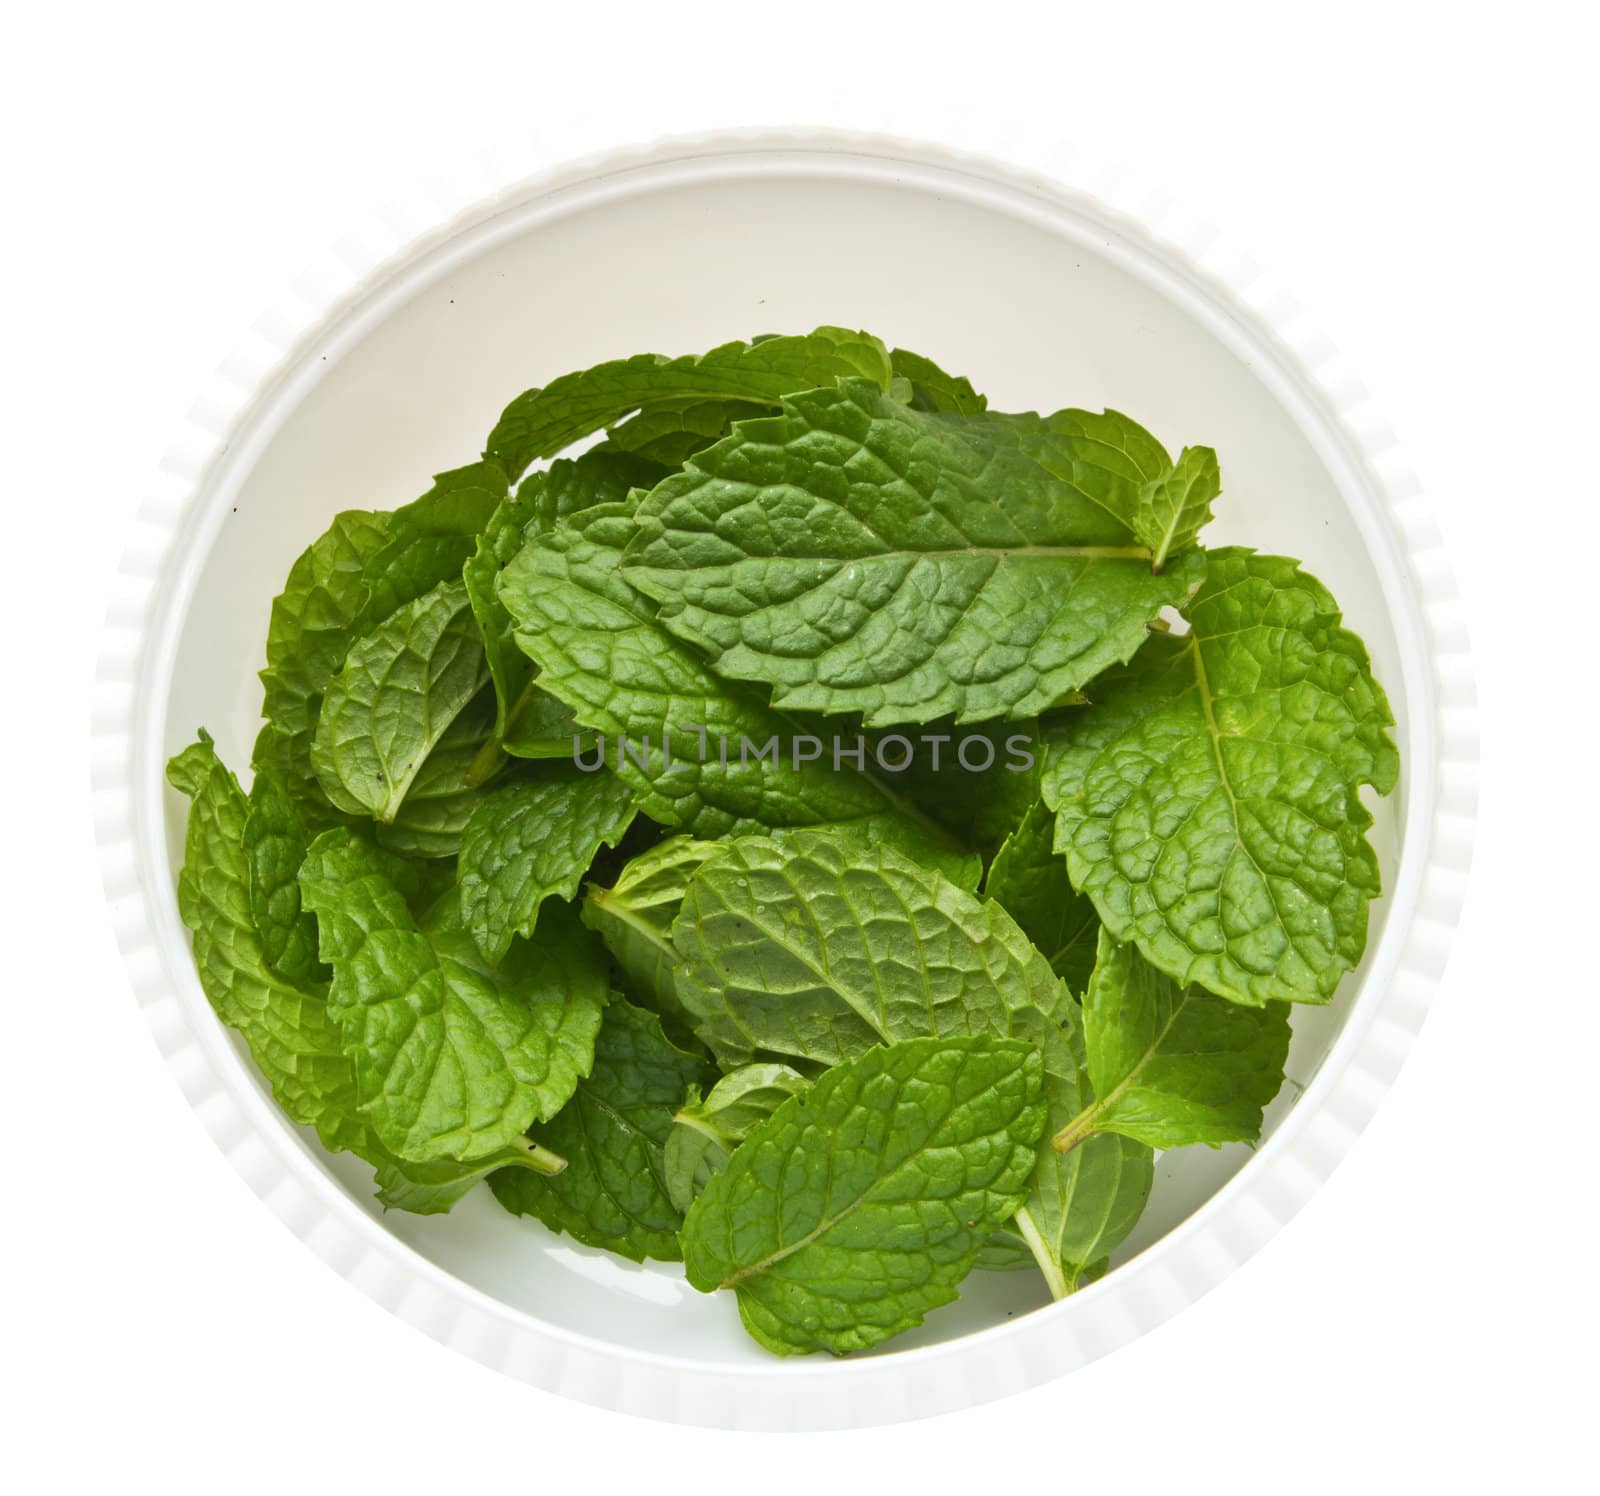 fresh mint leaves in cup isolated on white background. by kurapy